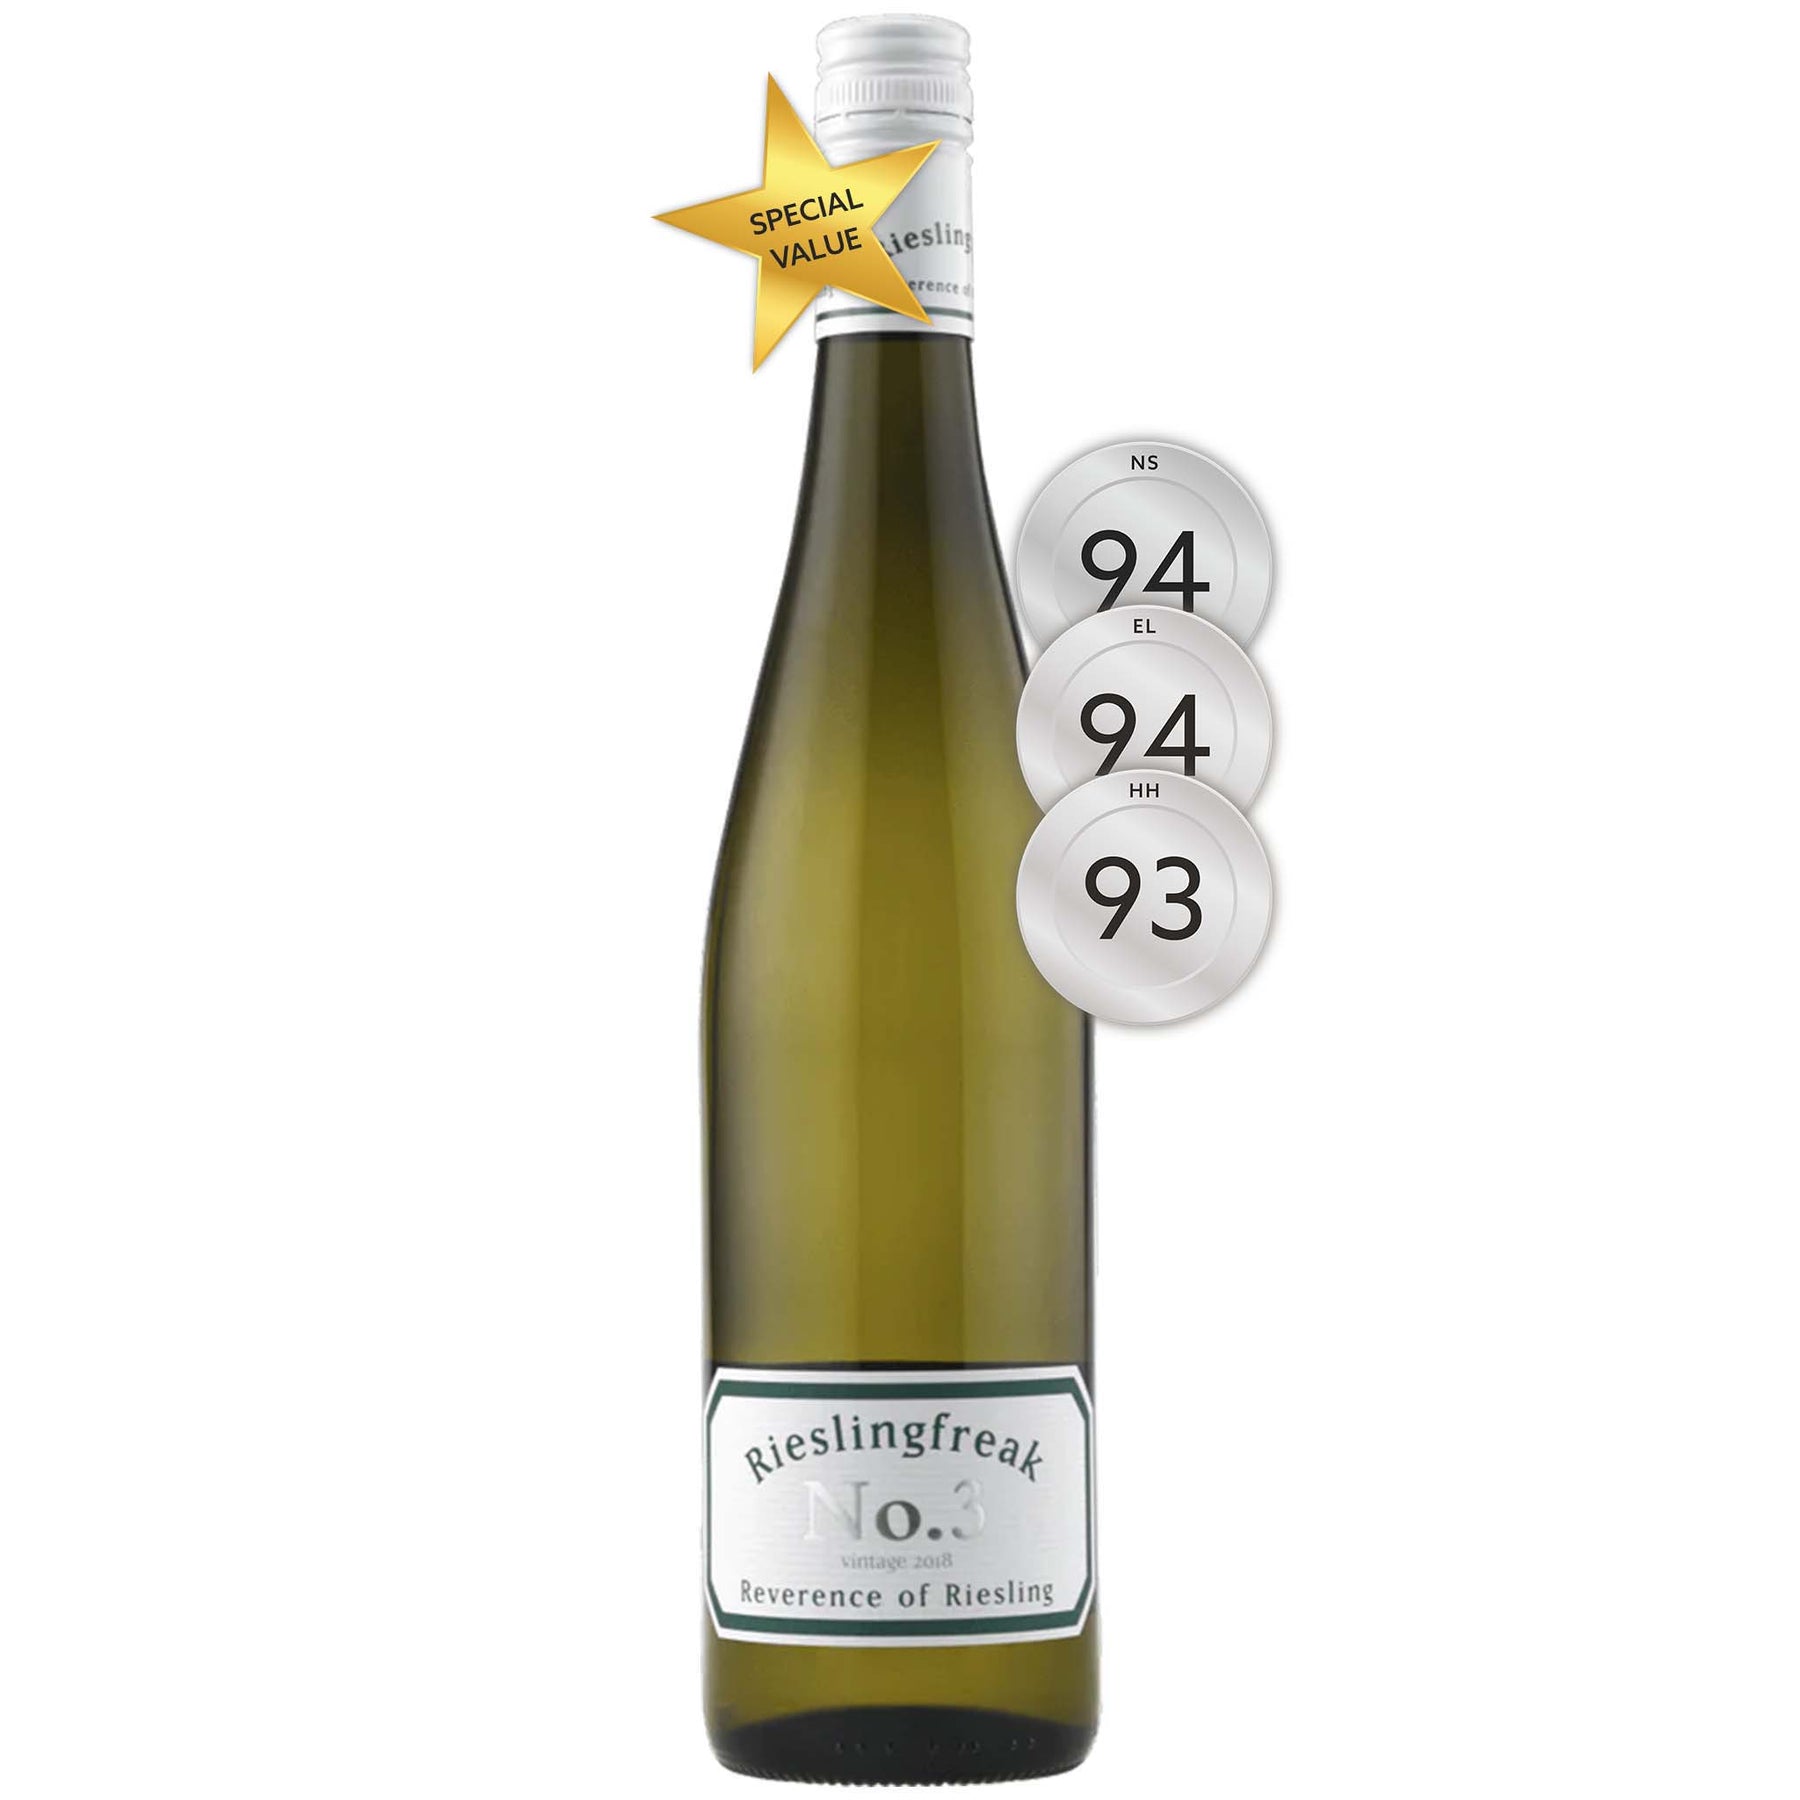 Rieslingfreak No 3 Clare Valley Riesling 2021